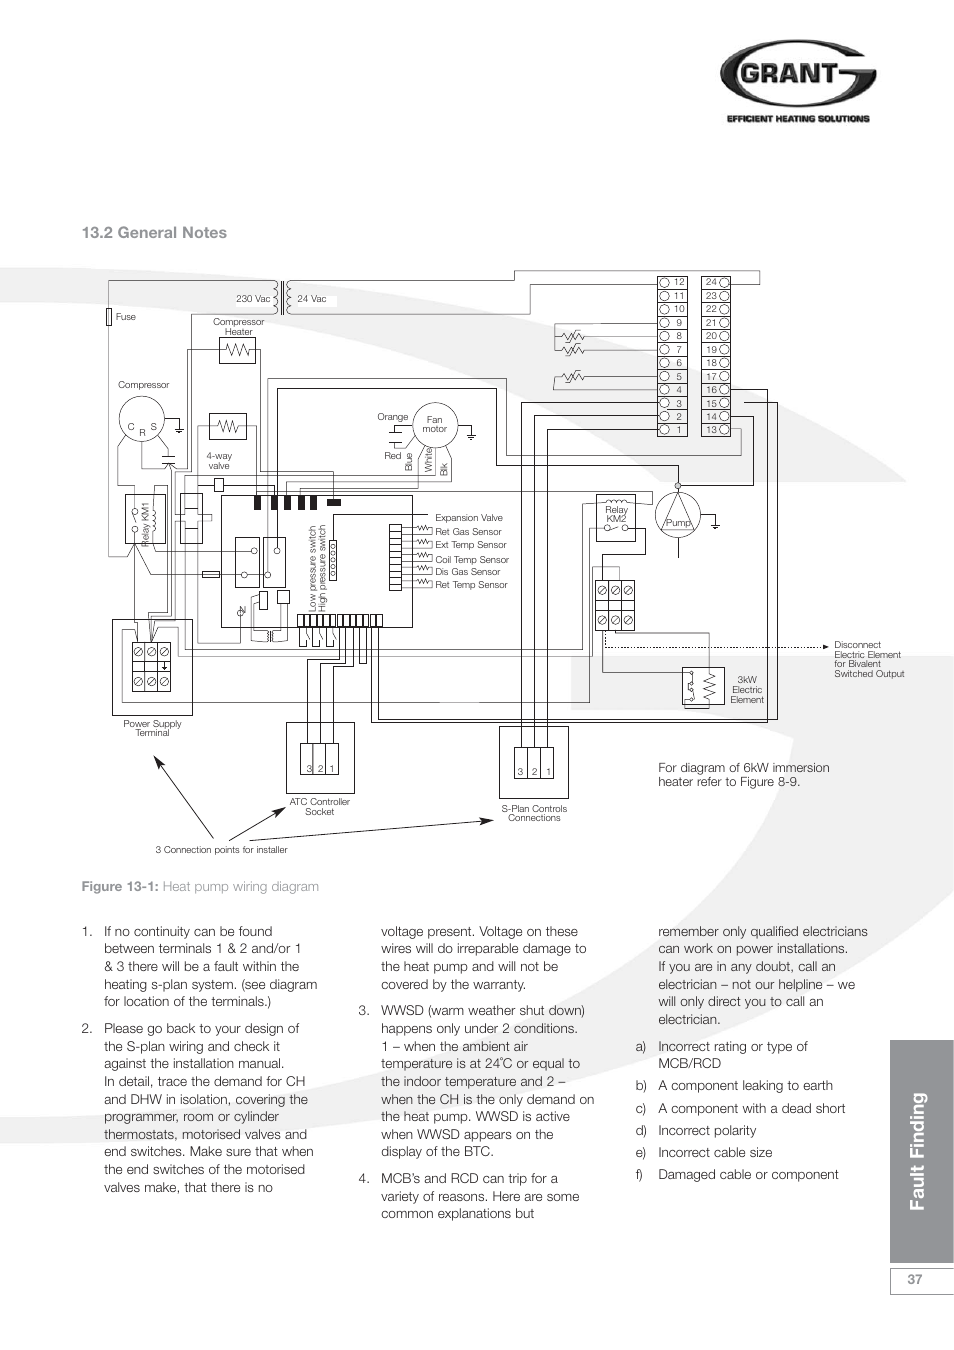 Fault finding | Grant Products HPAW155 User Manual | Page 41 / 50